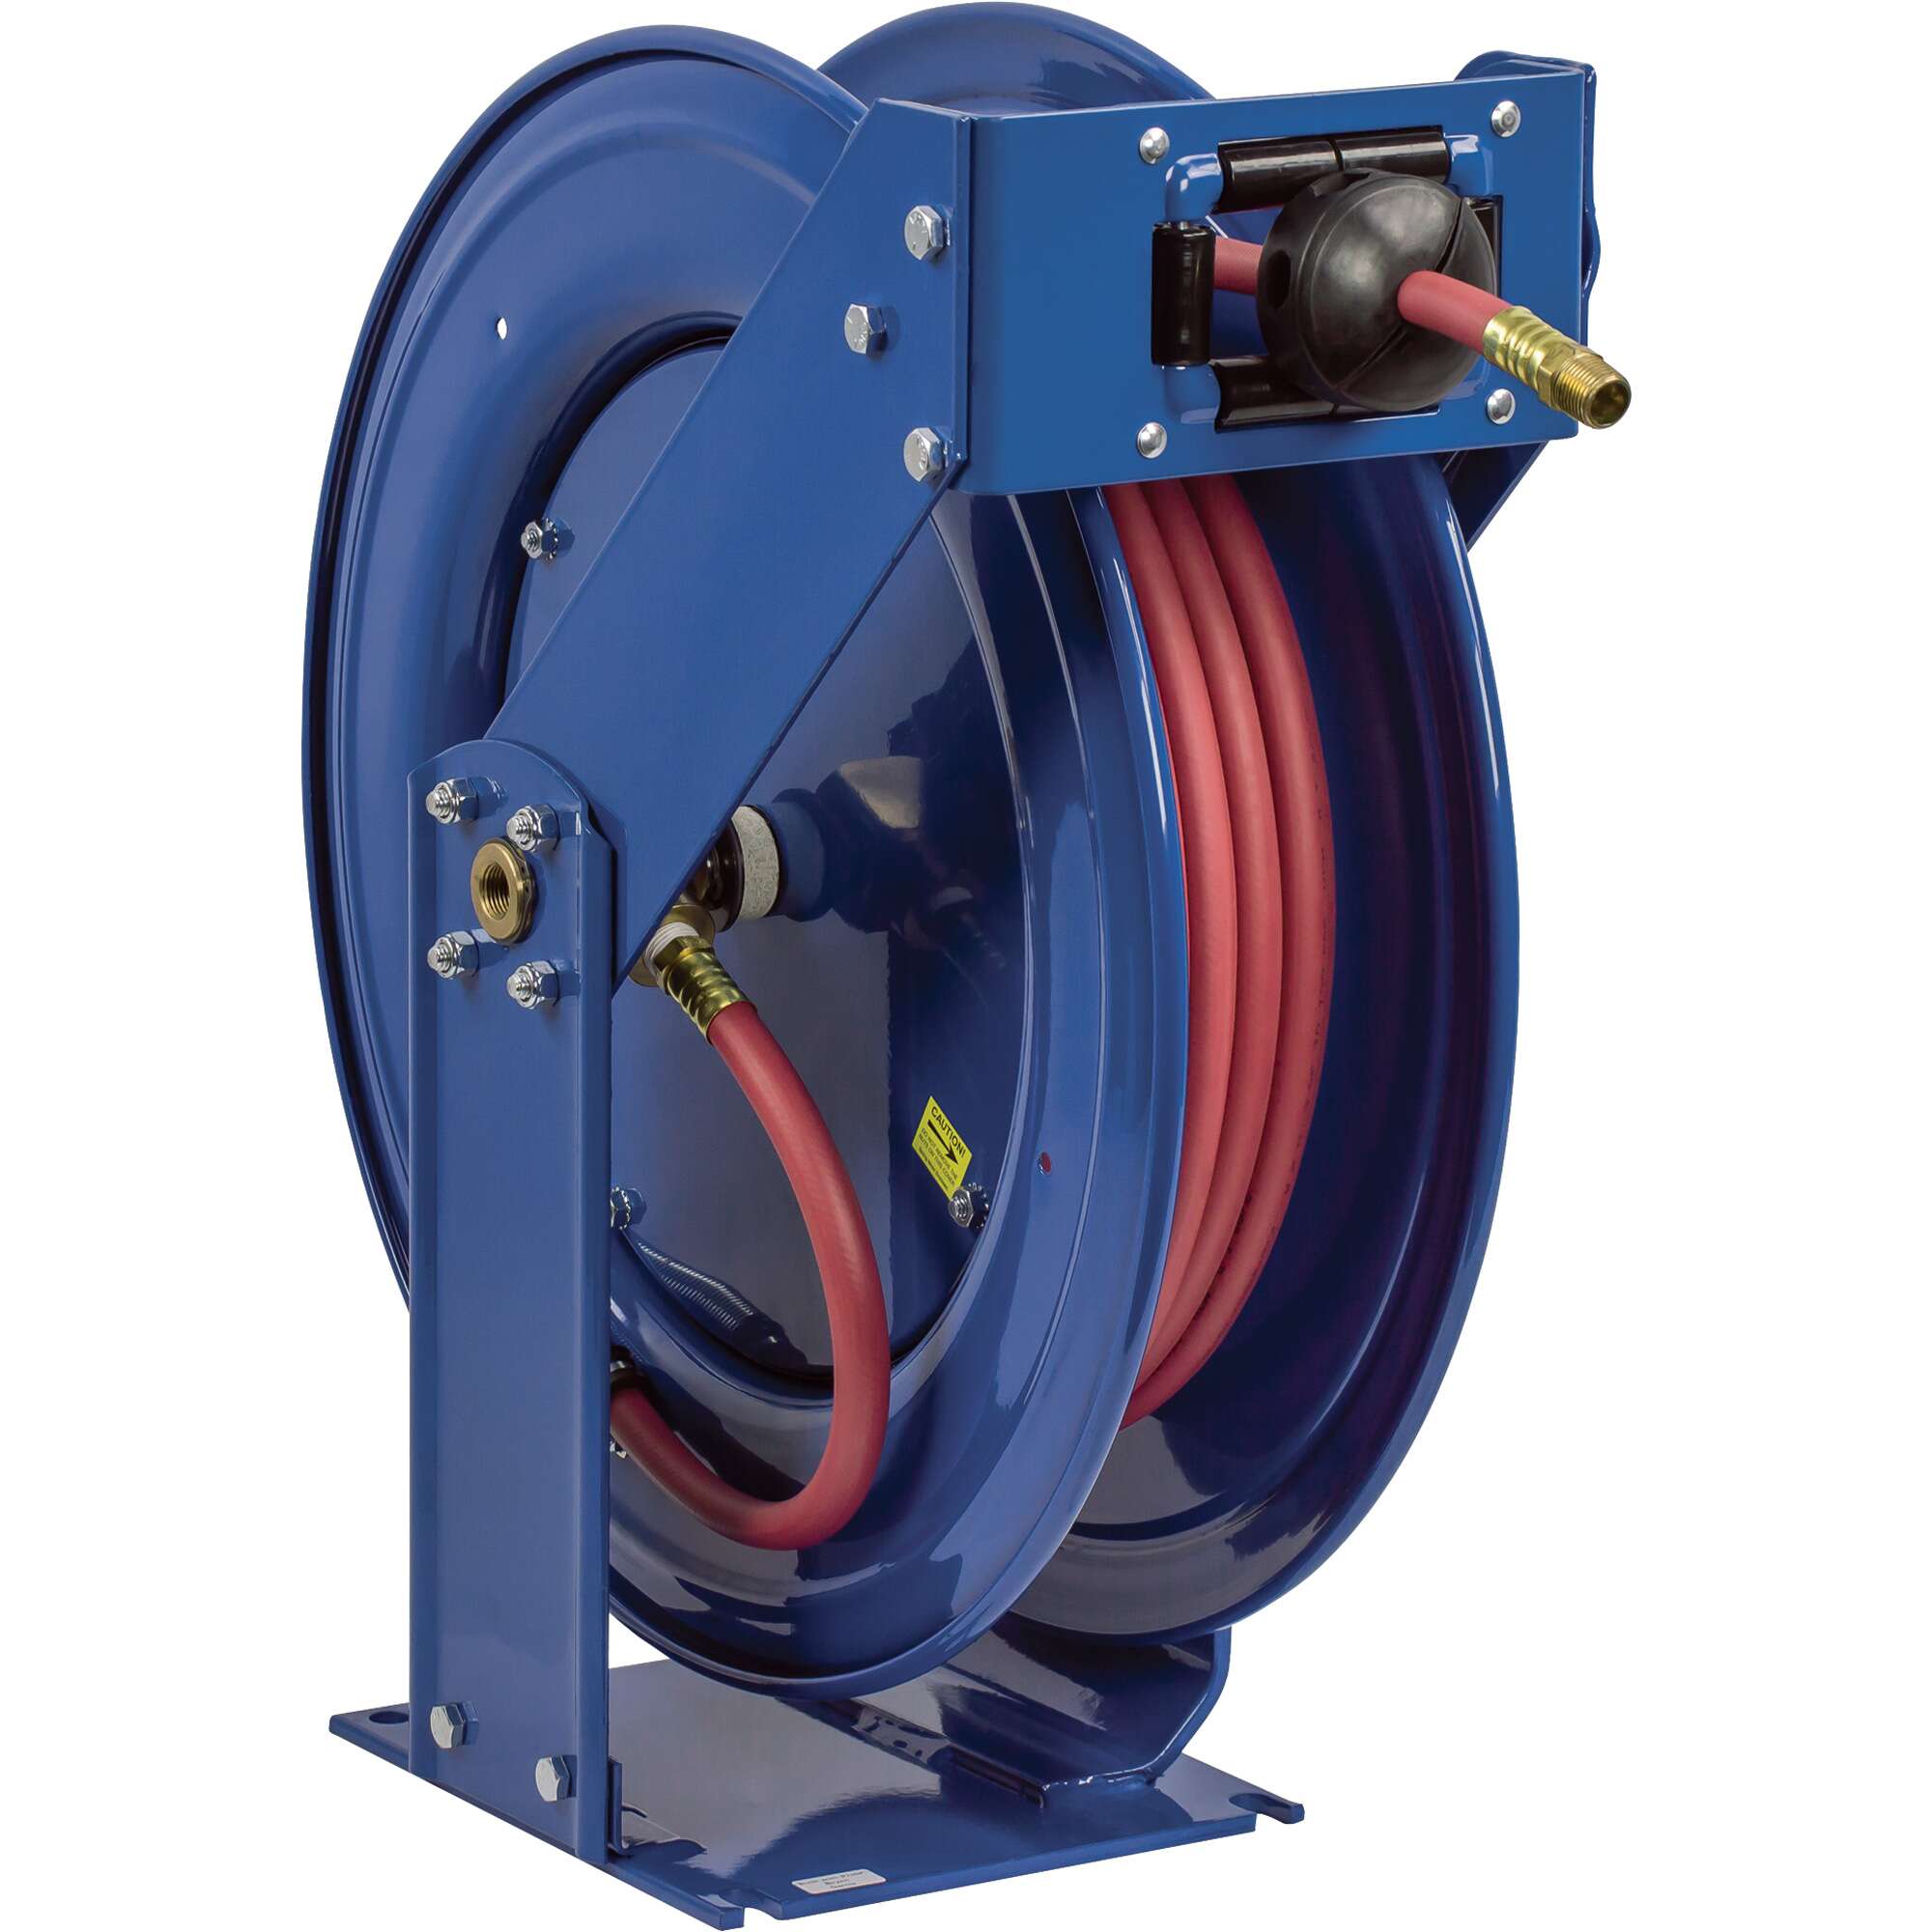 Coxreels Truck Series Maximum Duty Air Hose Reel With 1/2in x 100ft PVC Hose Max 300 PSI